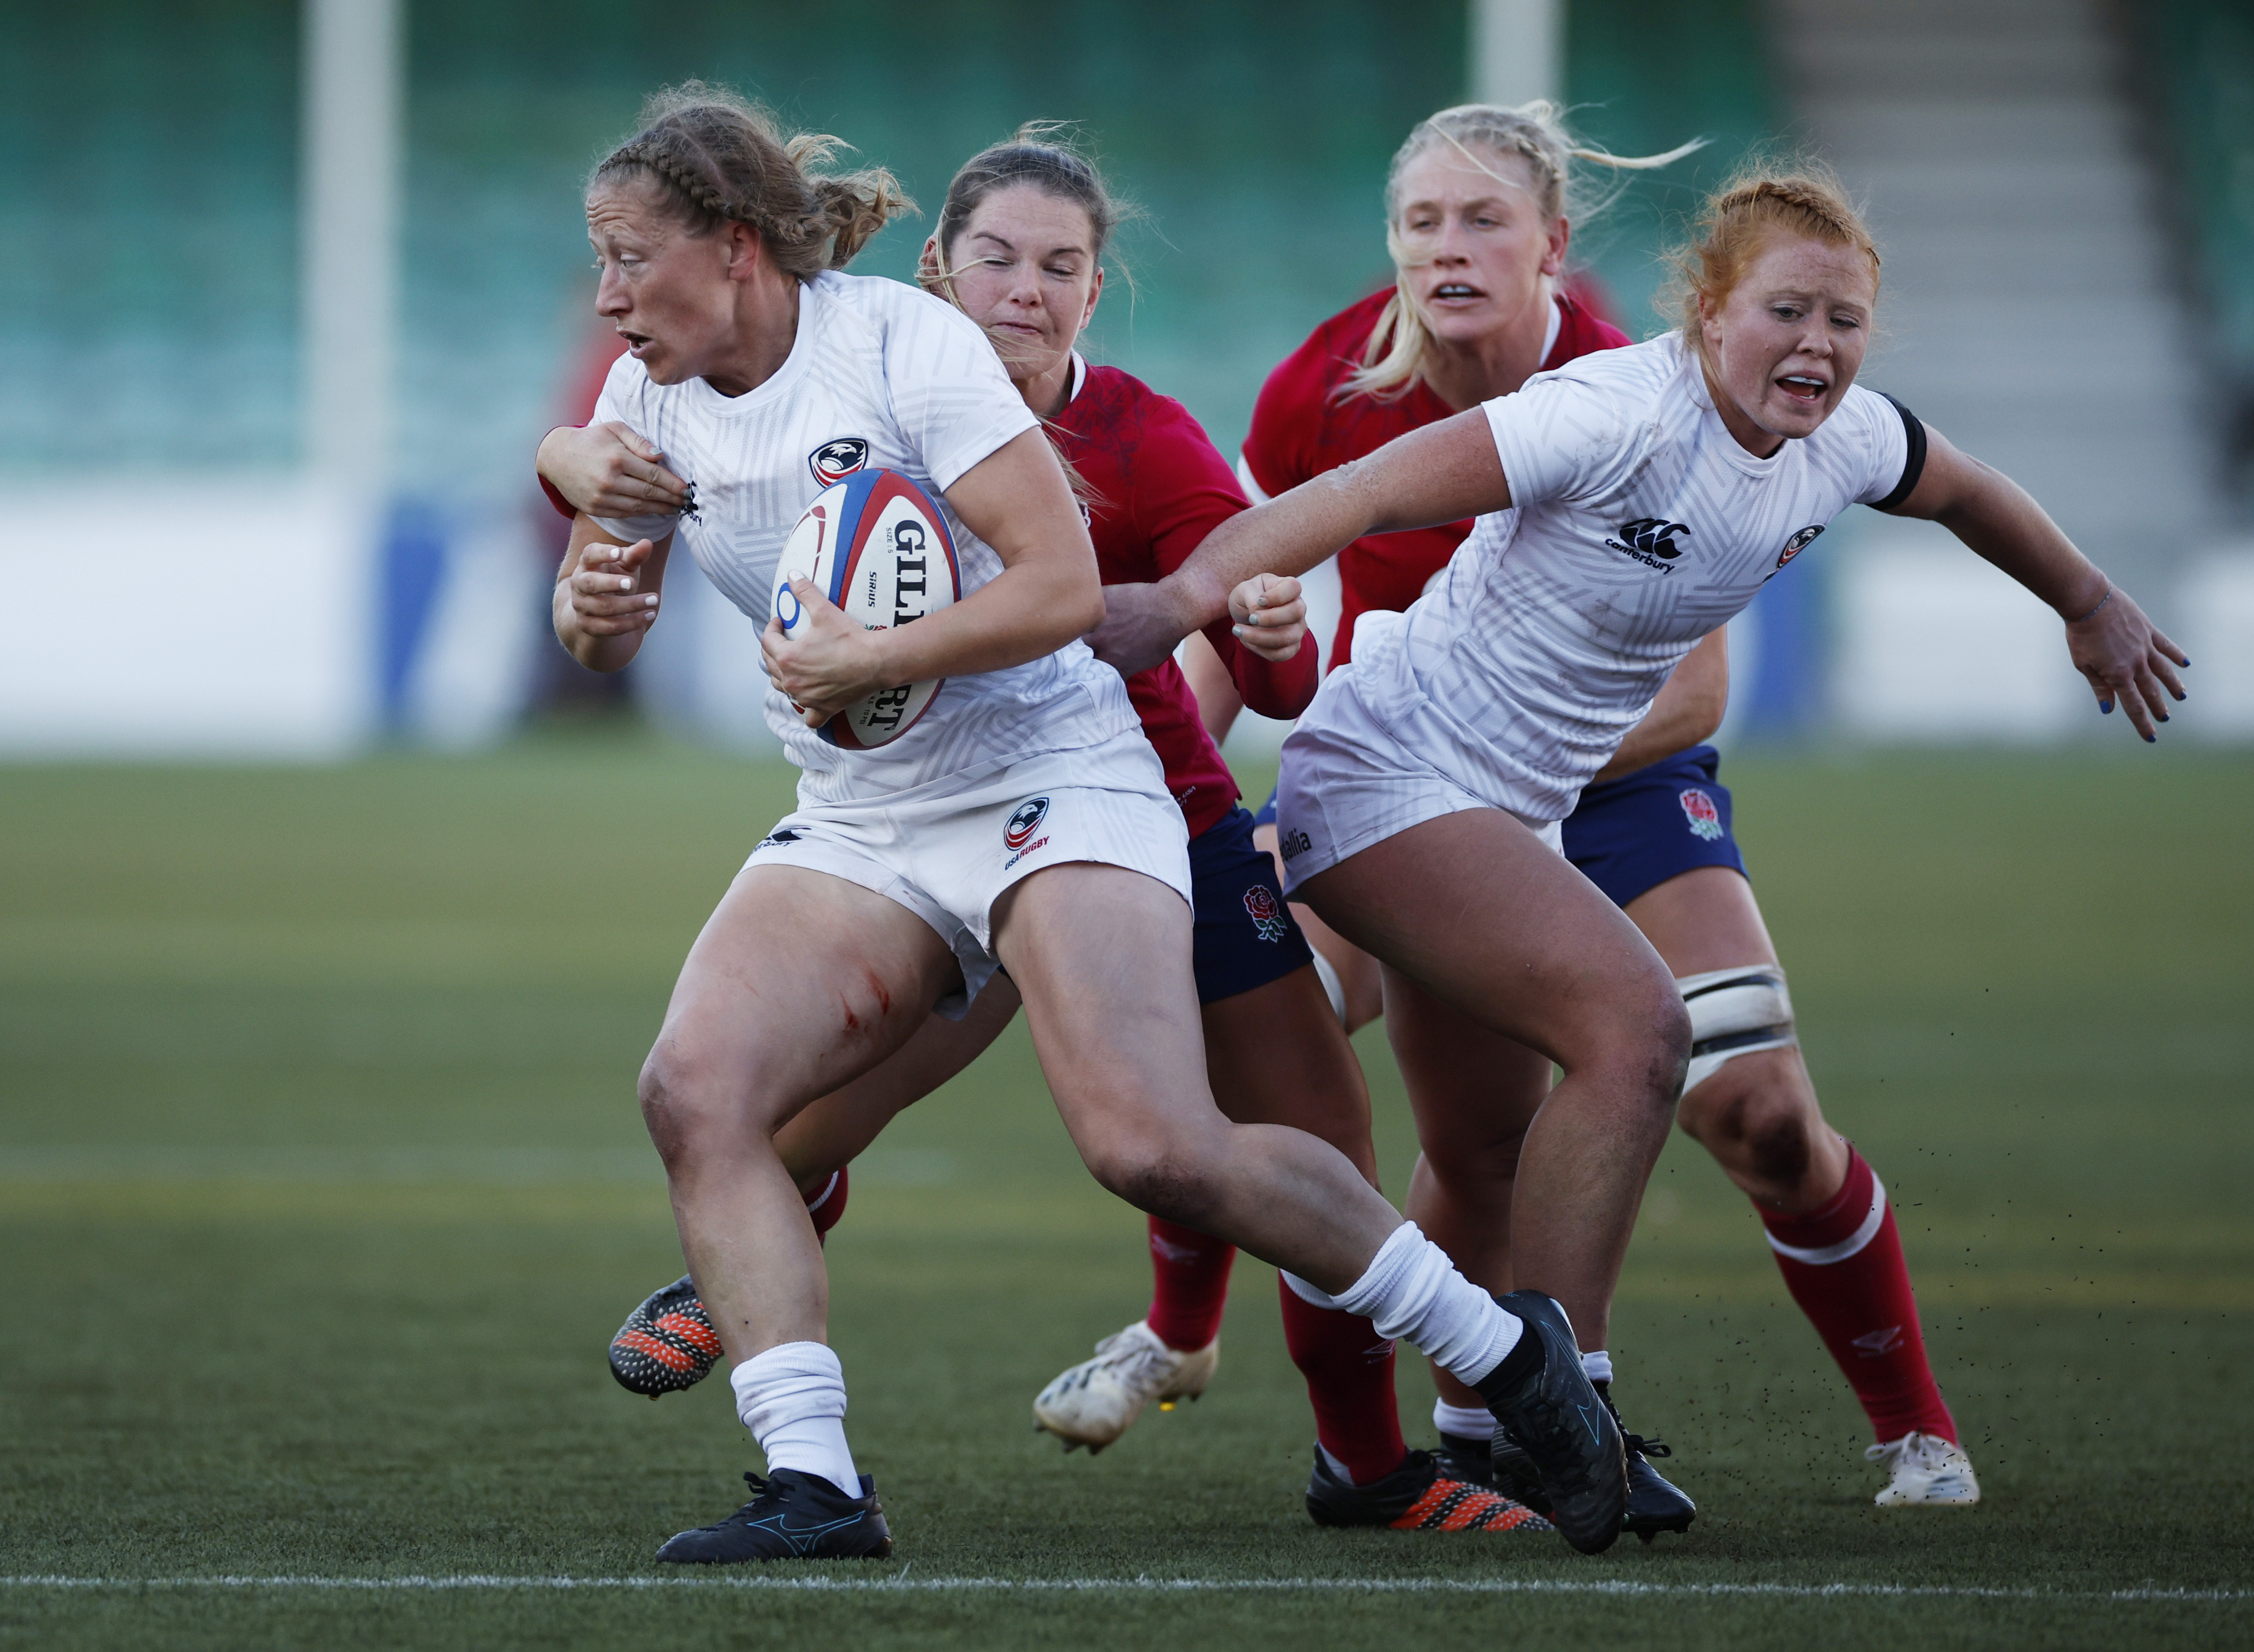 Rugby Union - Women's International - England v United States - Sixways Stadium, Worcester, Britain - November 21, 2021 United States' Kate Zackary is tackled by England's Leanne Infante Action Images via Reuters/John Sibley